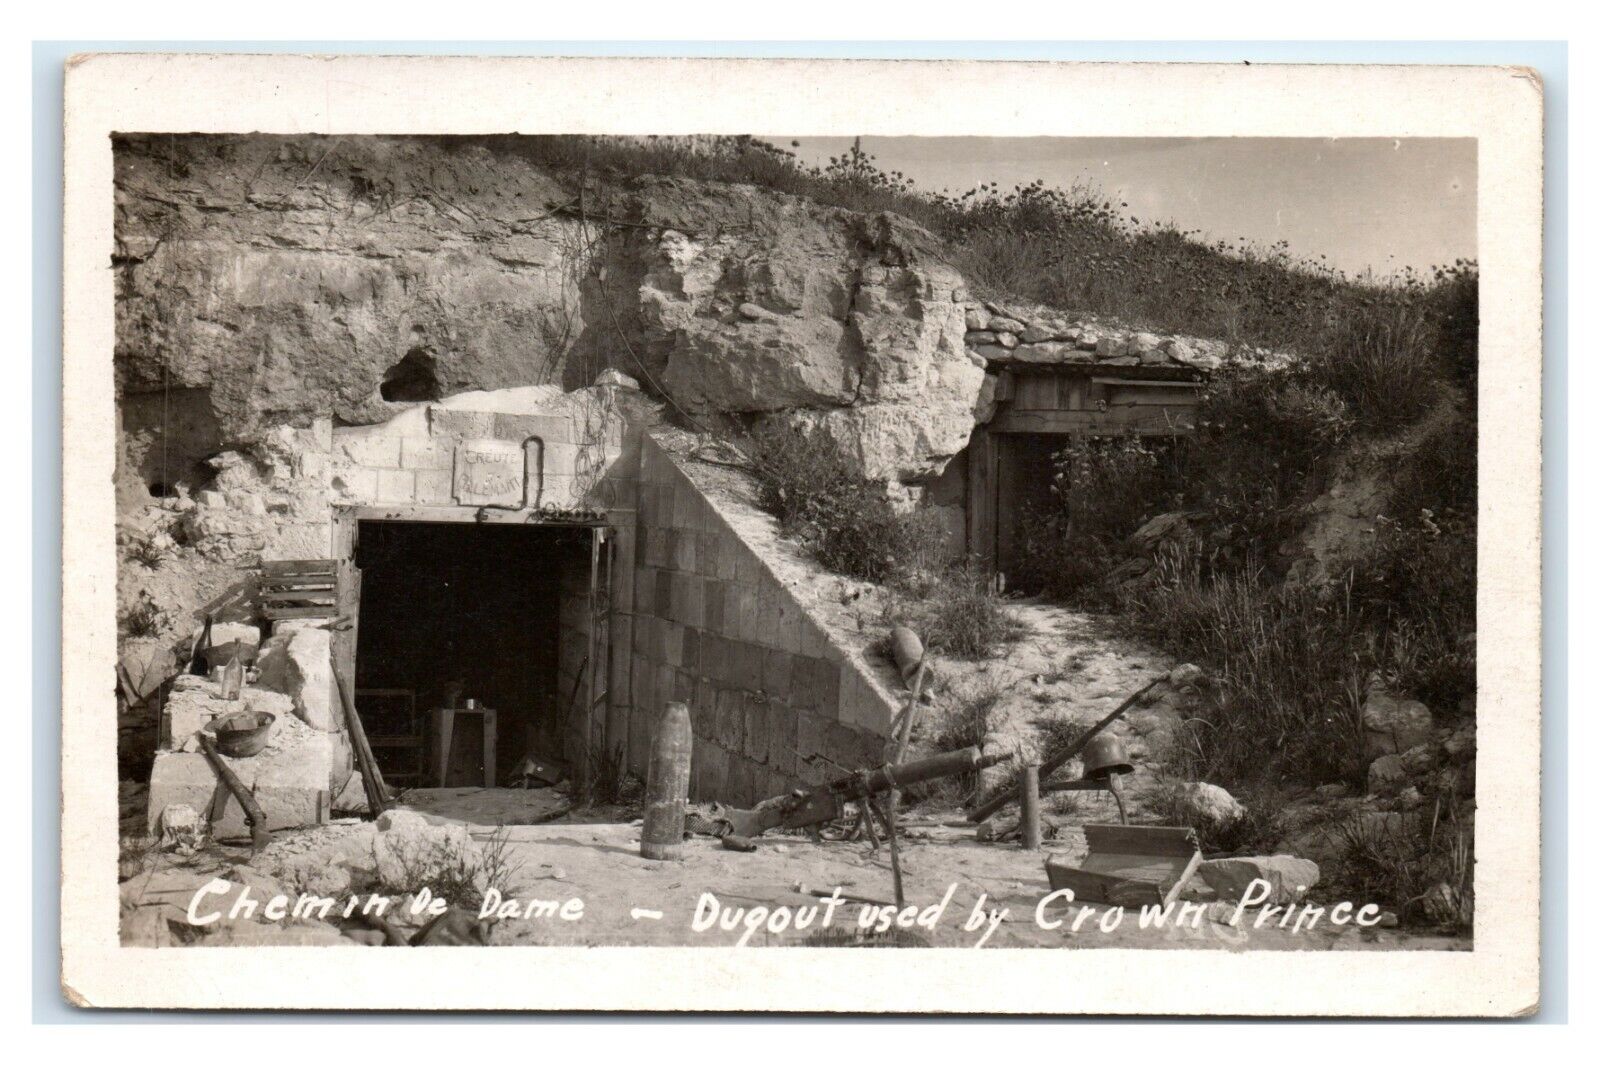 Postcard Chemin des Dame France - Dugout used by Crown Prince RPPC C20